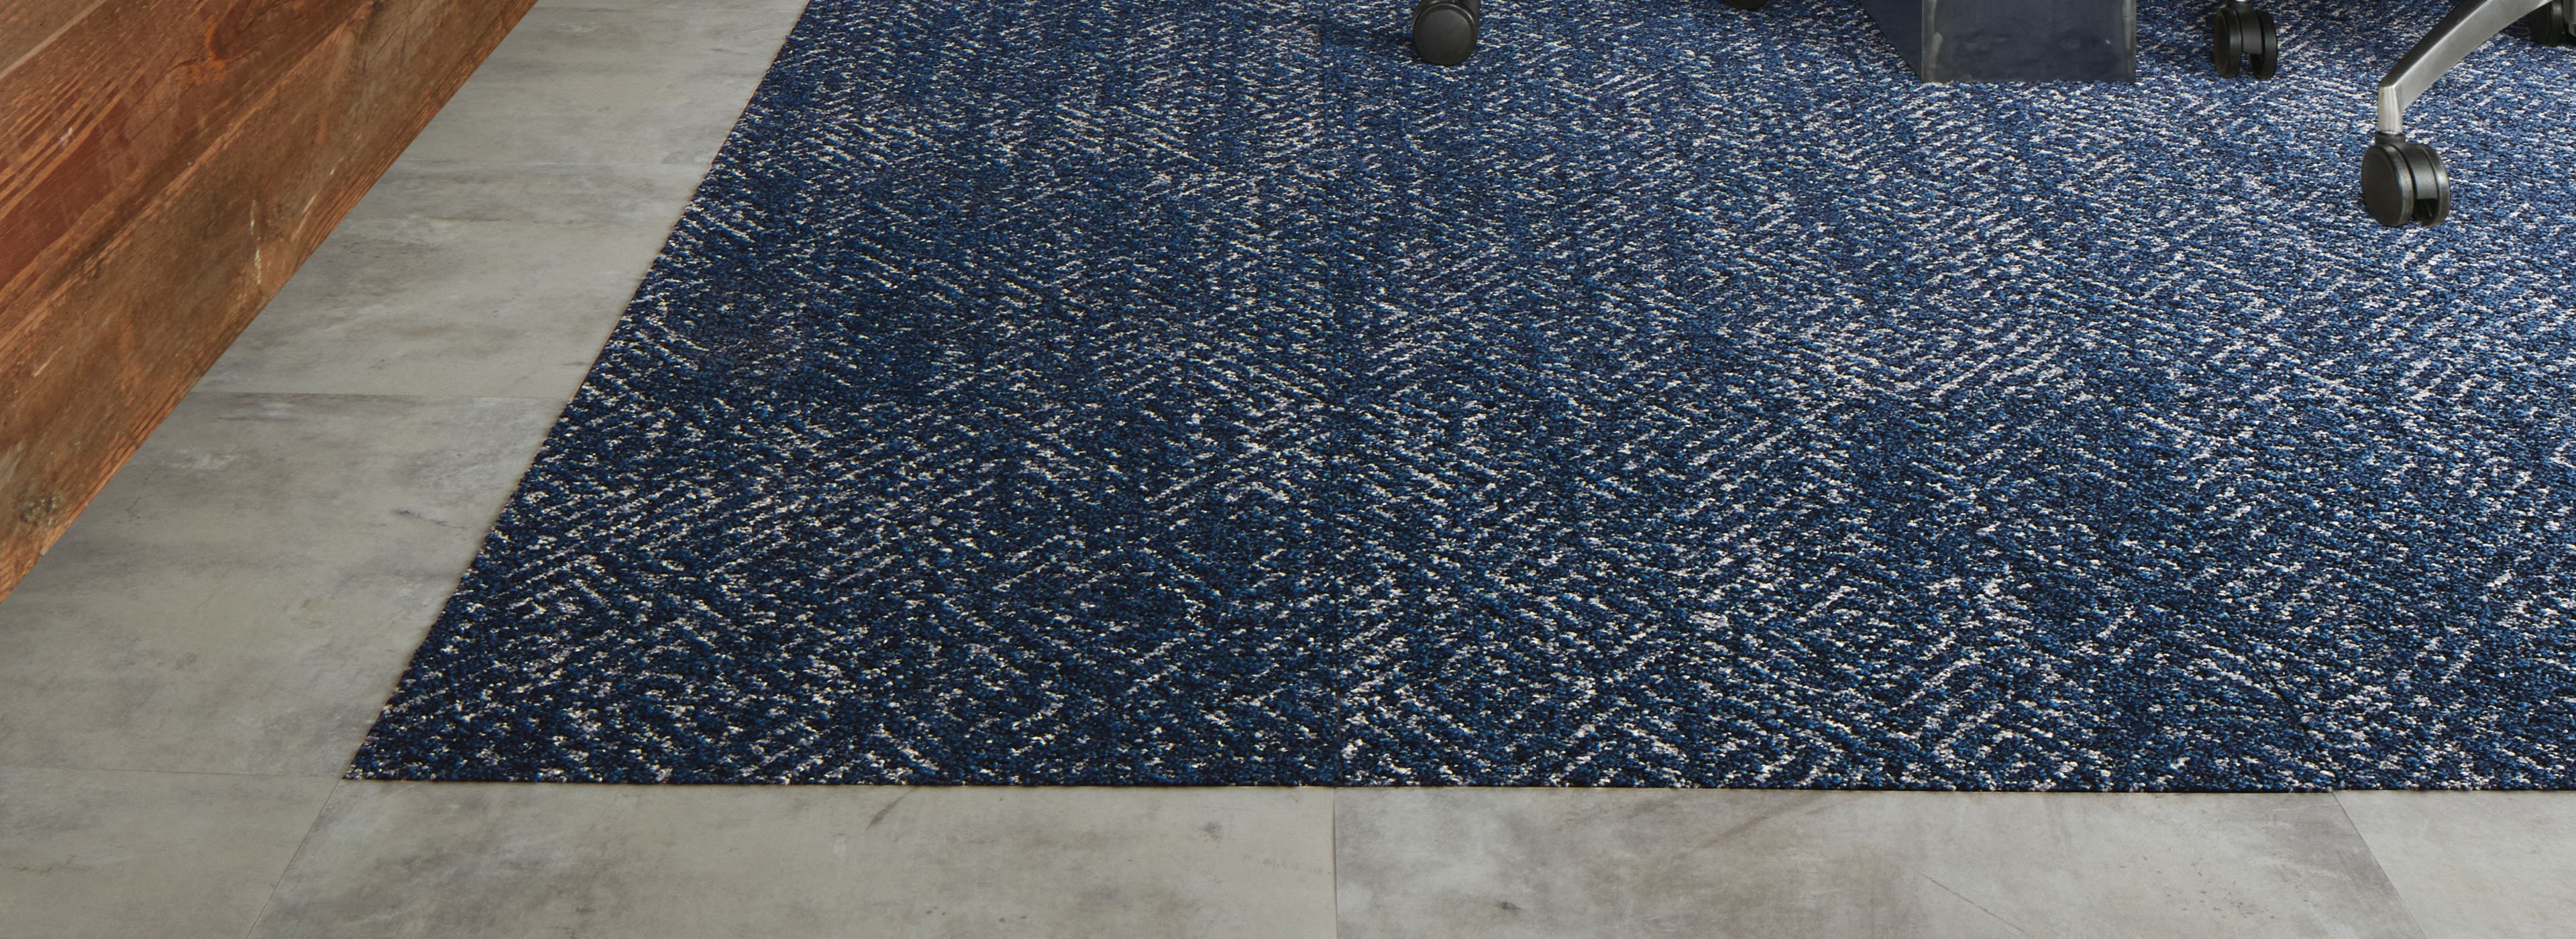 Interface Third Space 309 carpet tile with Textured Stones LVT in meeting room numéro d’image 1